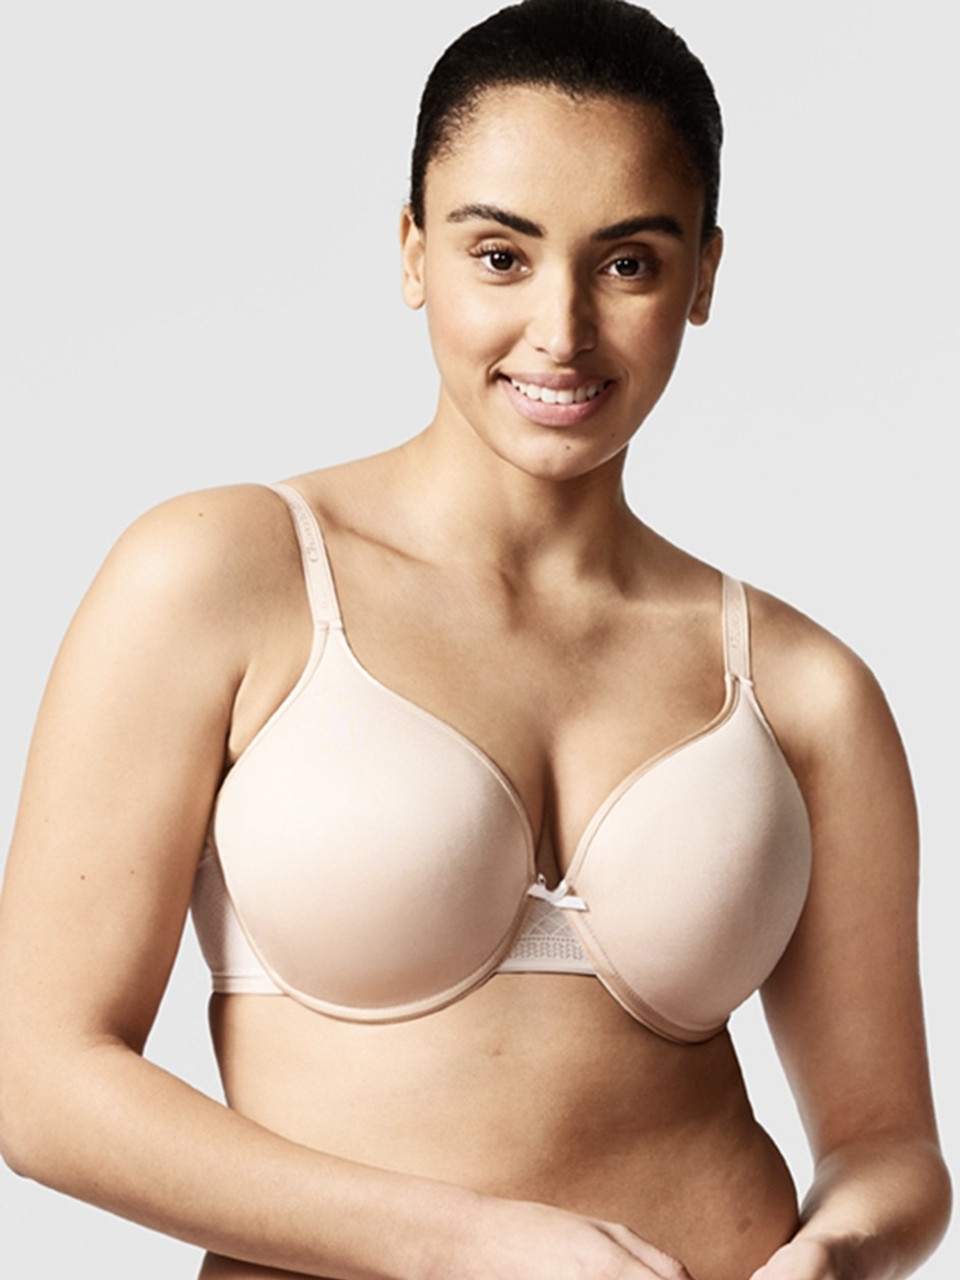 Chantelle Women's Adult Absolute Invisible Smooth Strapless Bra